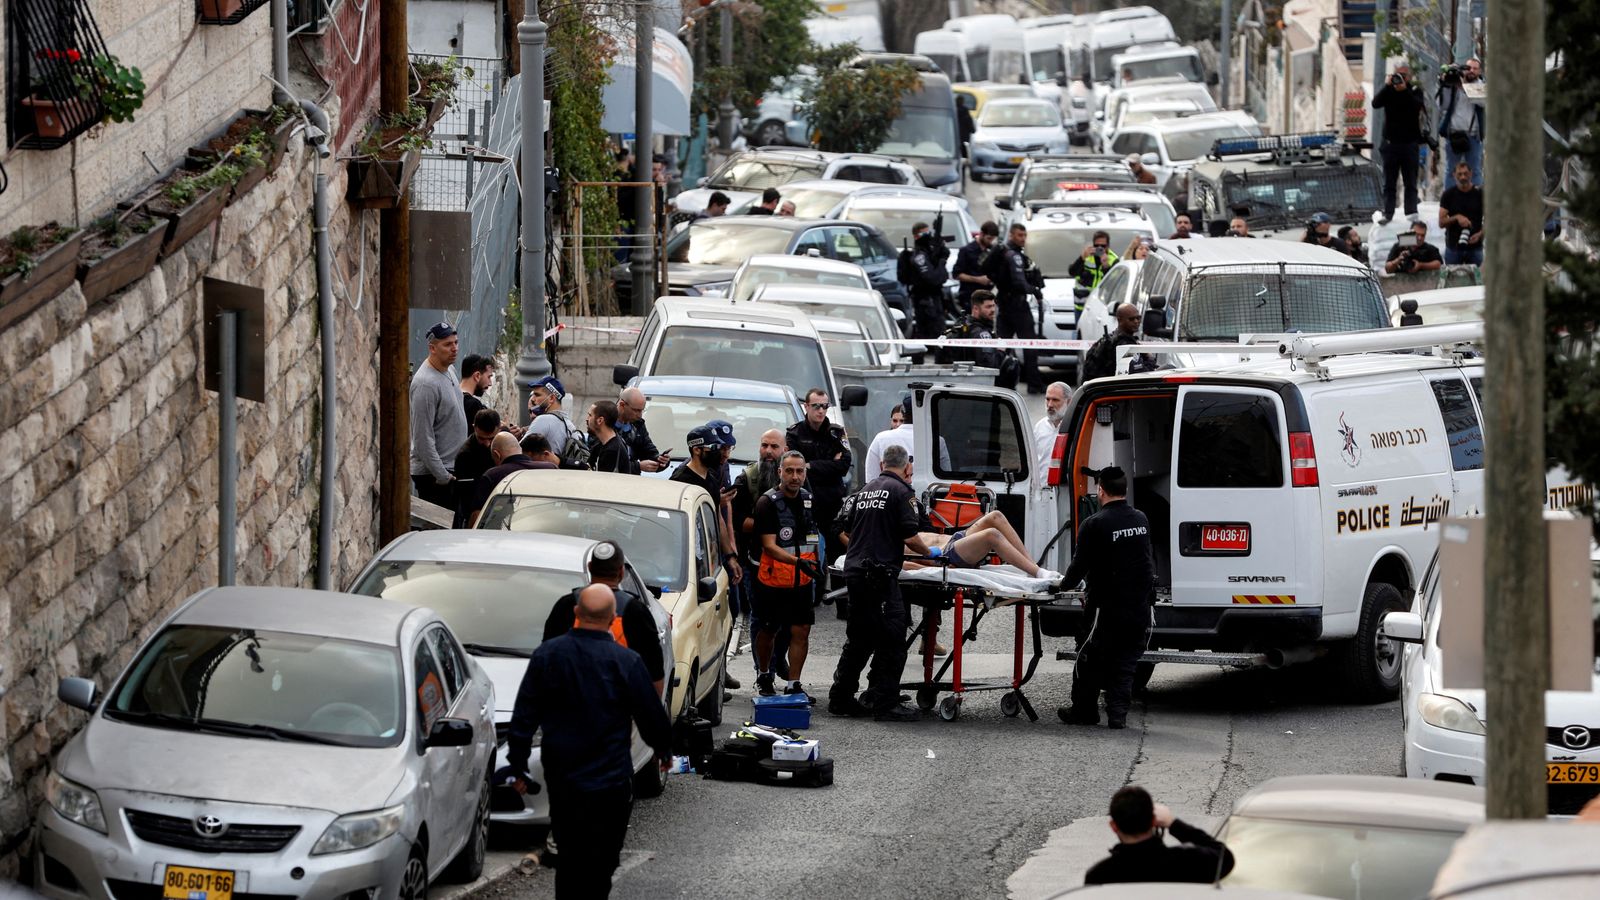 Jerusalem: Boy, 13, 'shoots and wounds' two people, hours after gunman killed seven outside synagogue